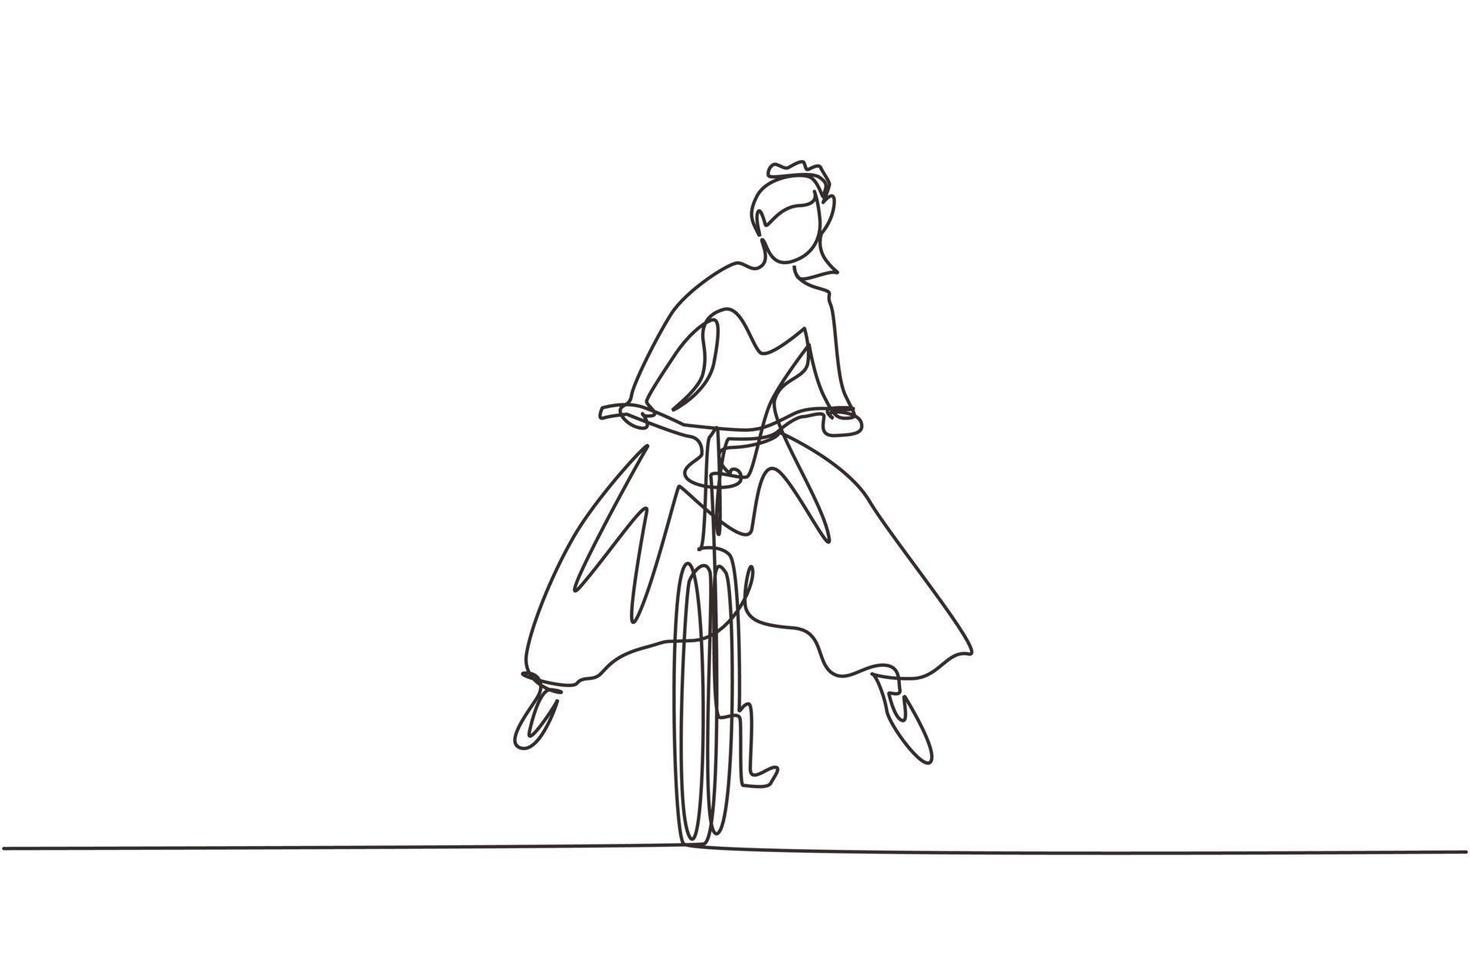 Single continuous line drawing happy young woman wearing wedding dress going to wedding celebration riding bicycle. Ecological, healthy vehicle of transportation. One line draw graphic design vector